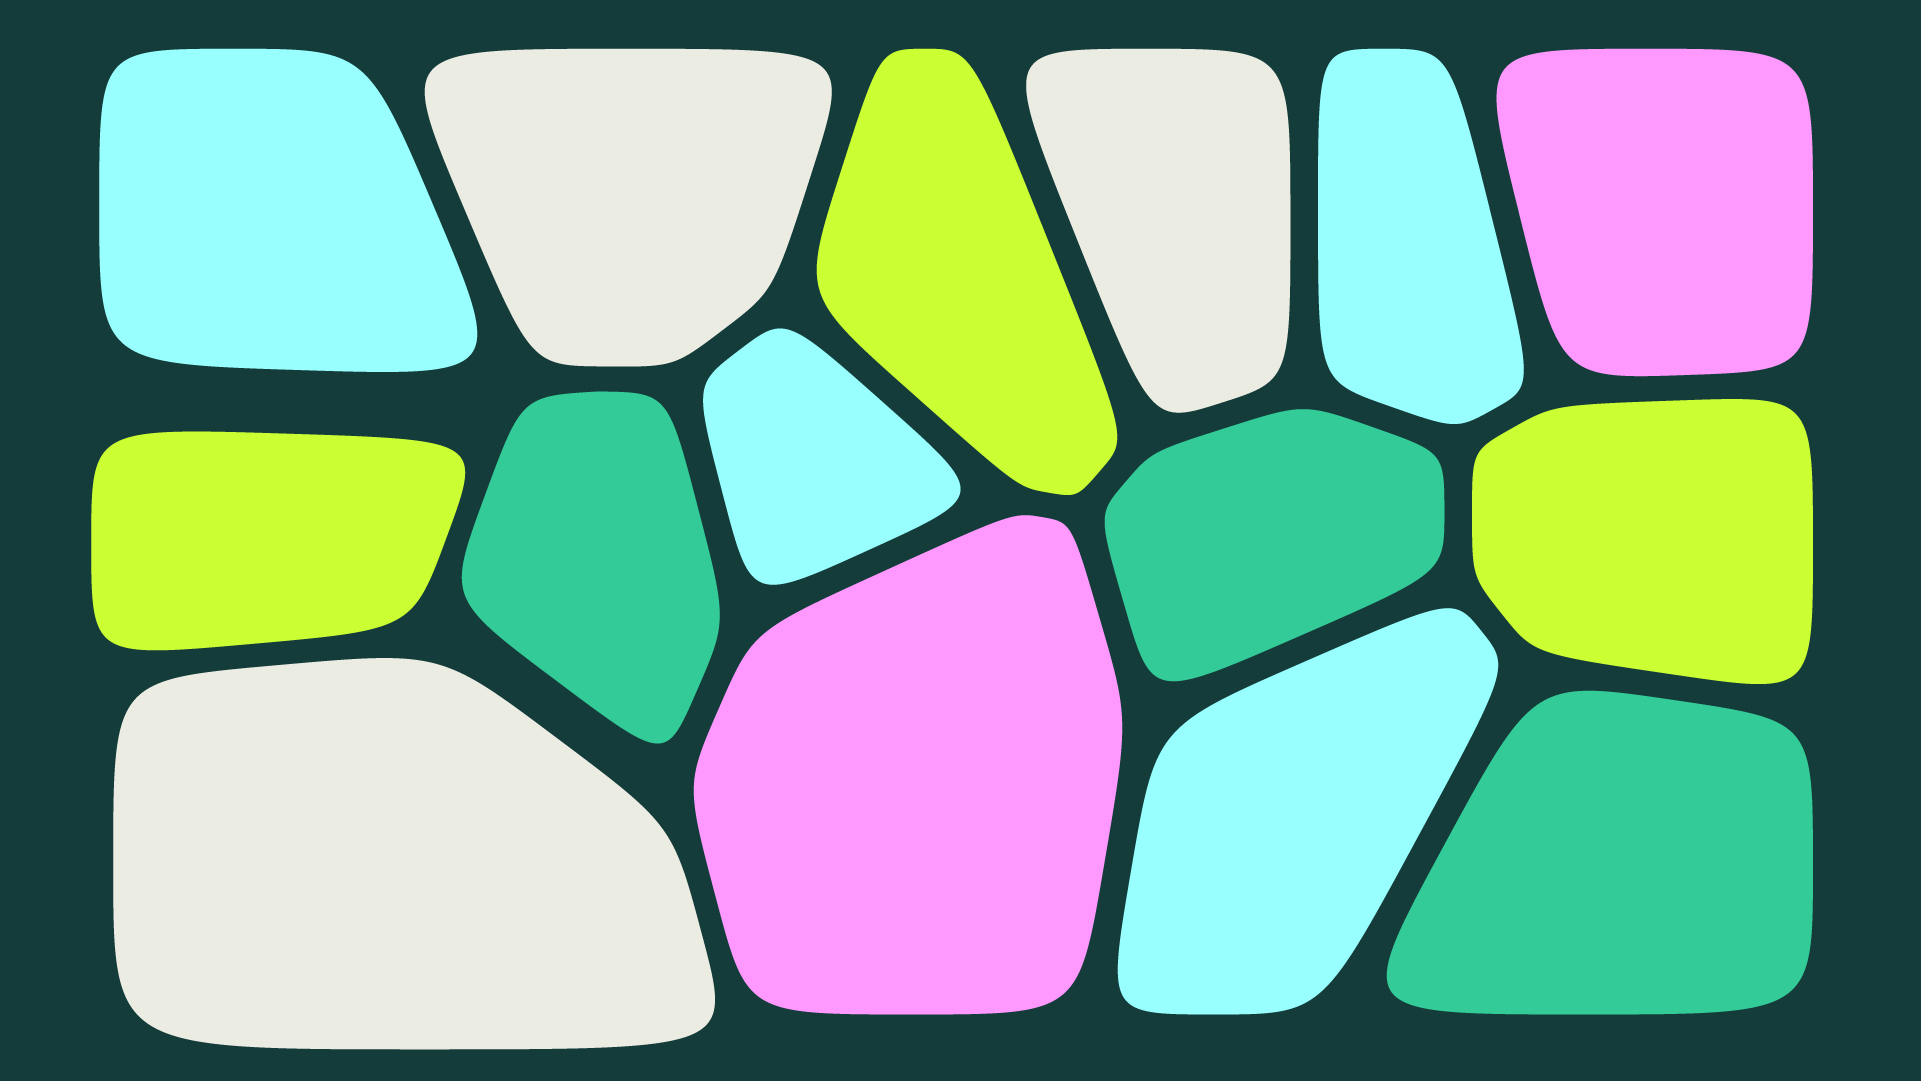 Colourful cells spread in an ordered fashion with uniform gaps.